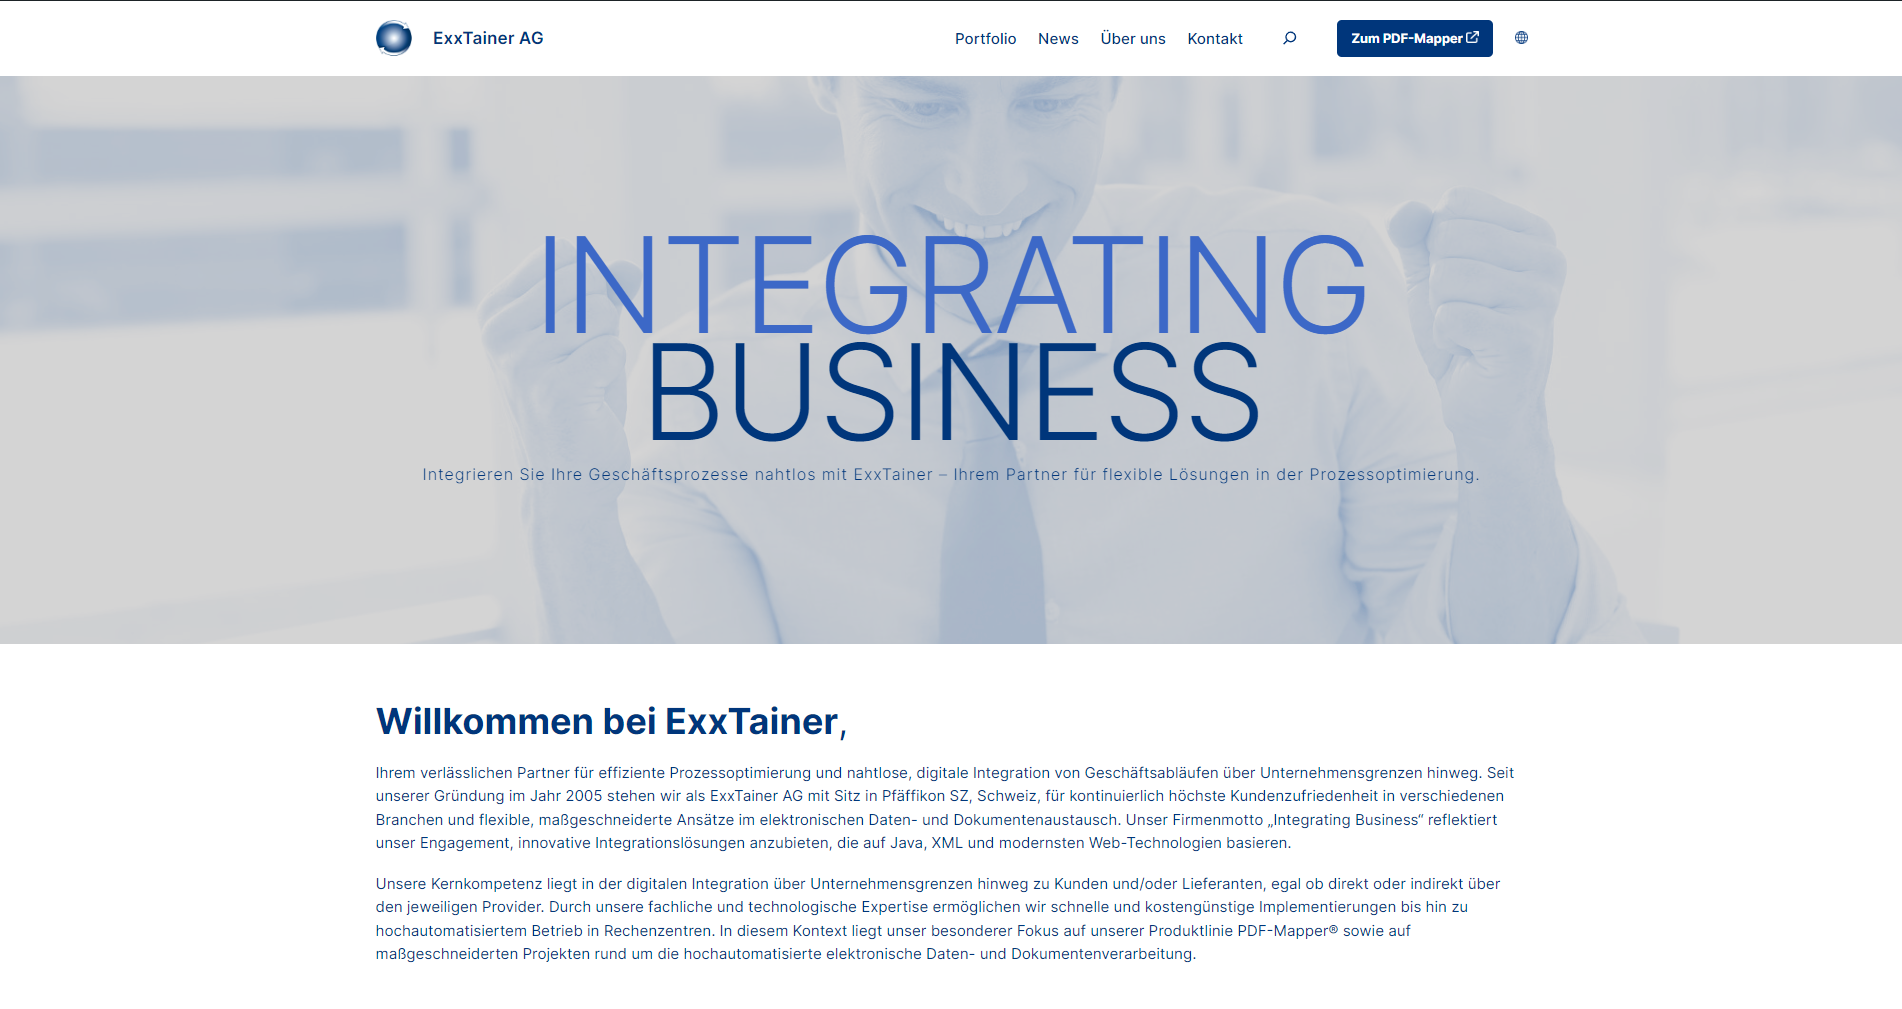 ExxTainer AG Website in a New Look